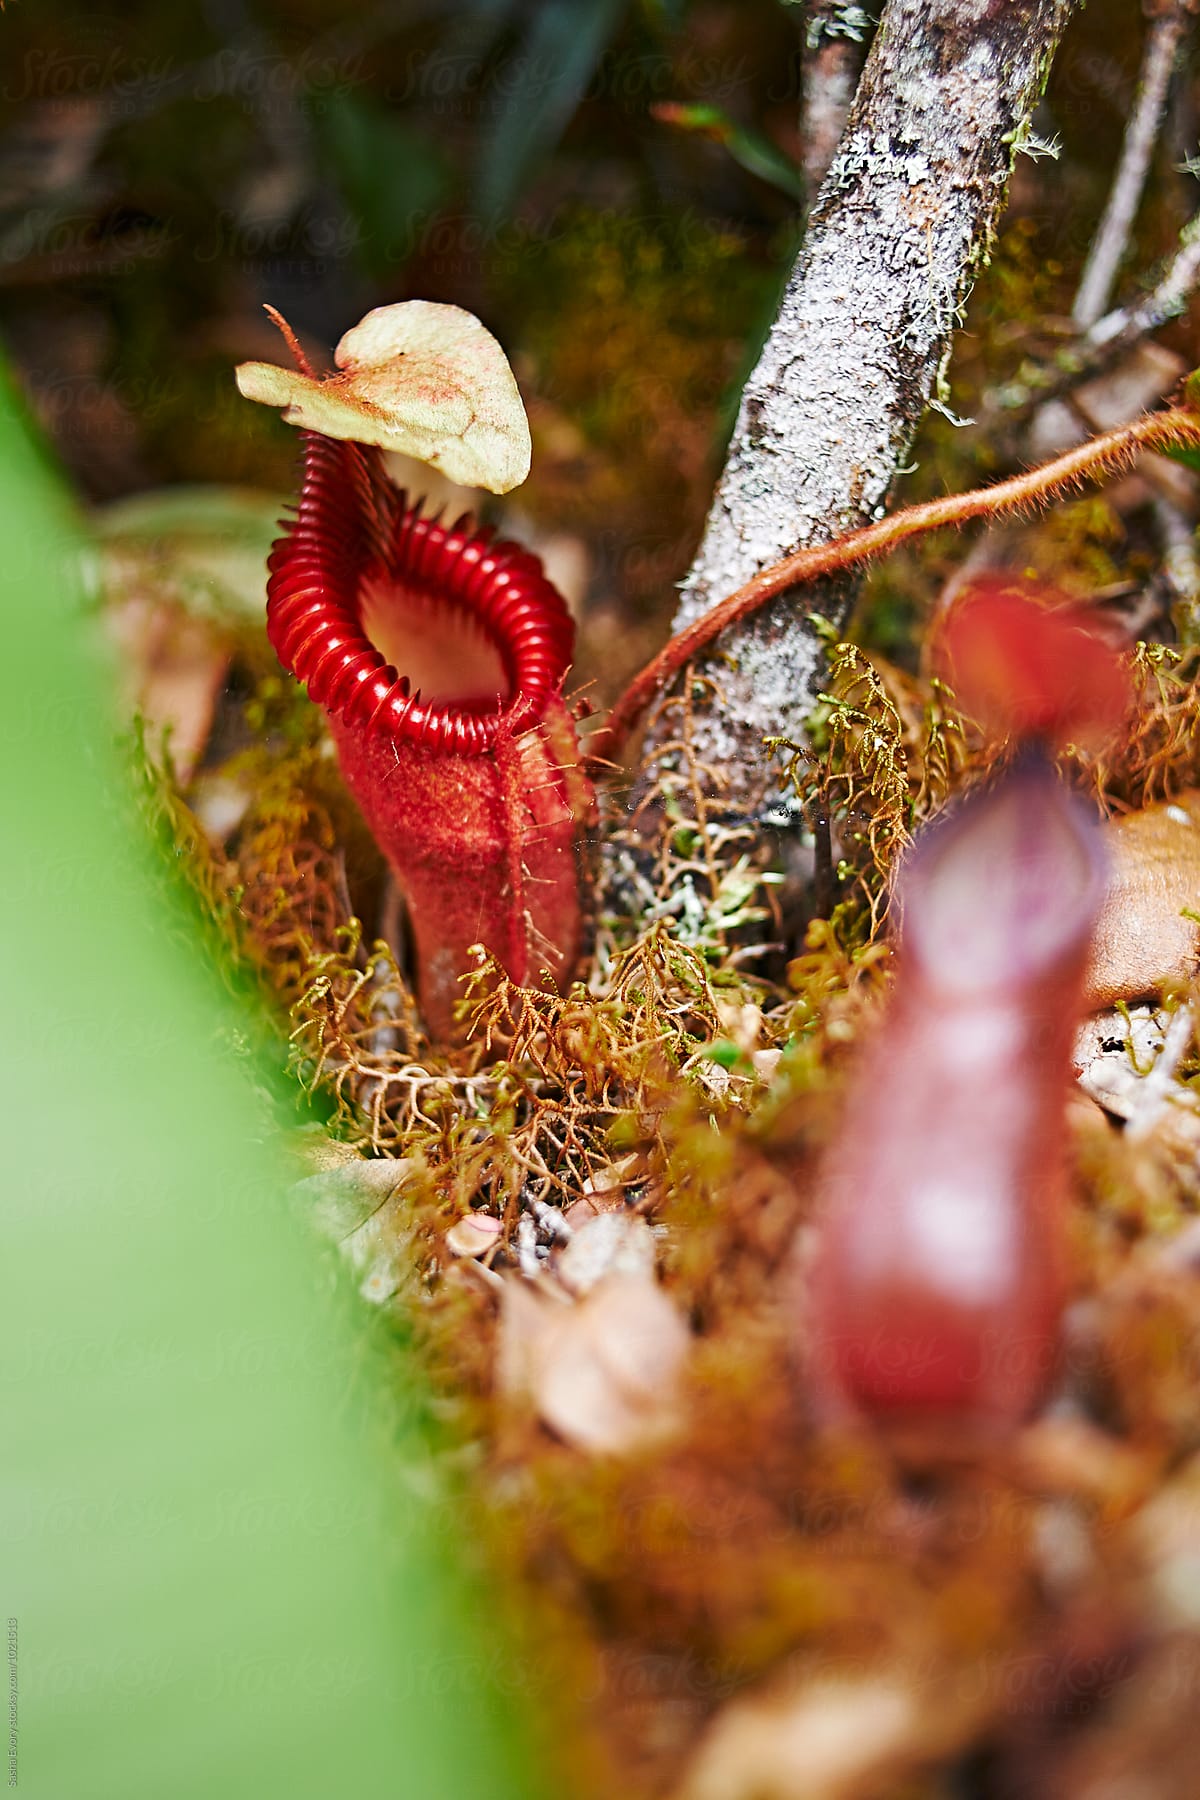 Nepenthes edwardsiana in its natural environment